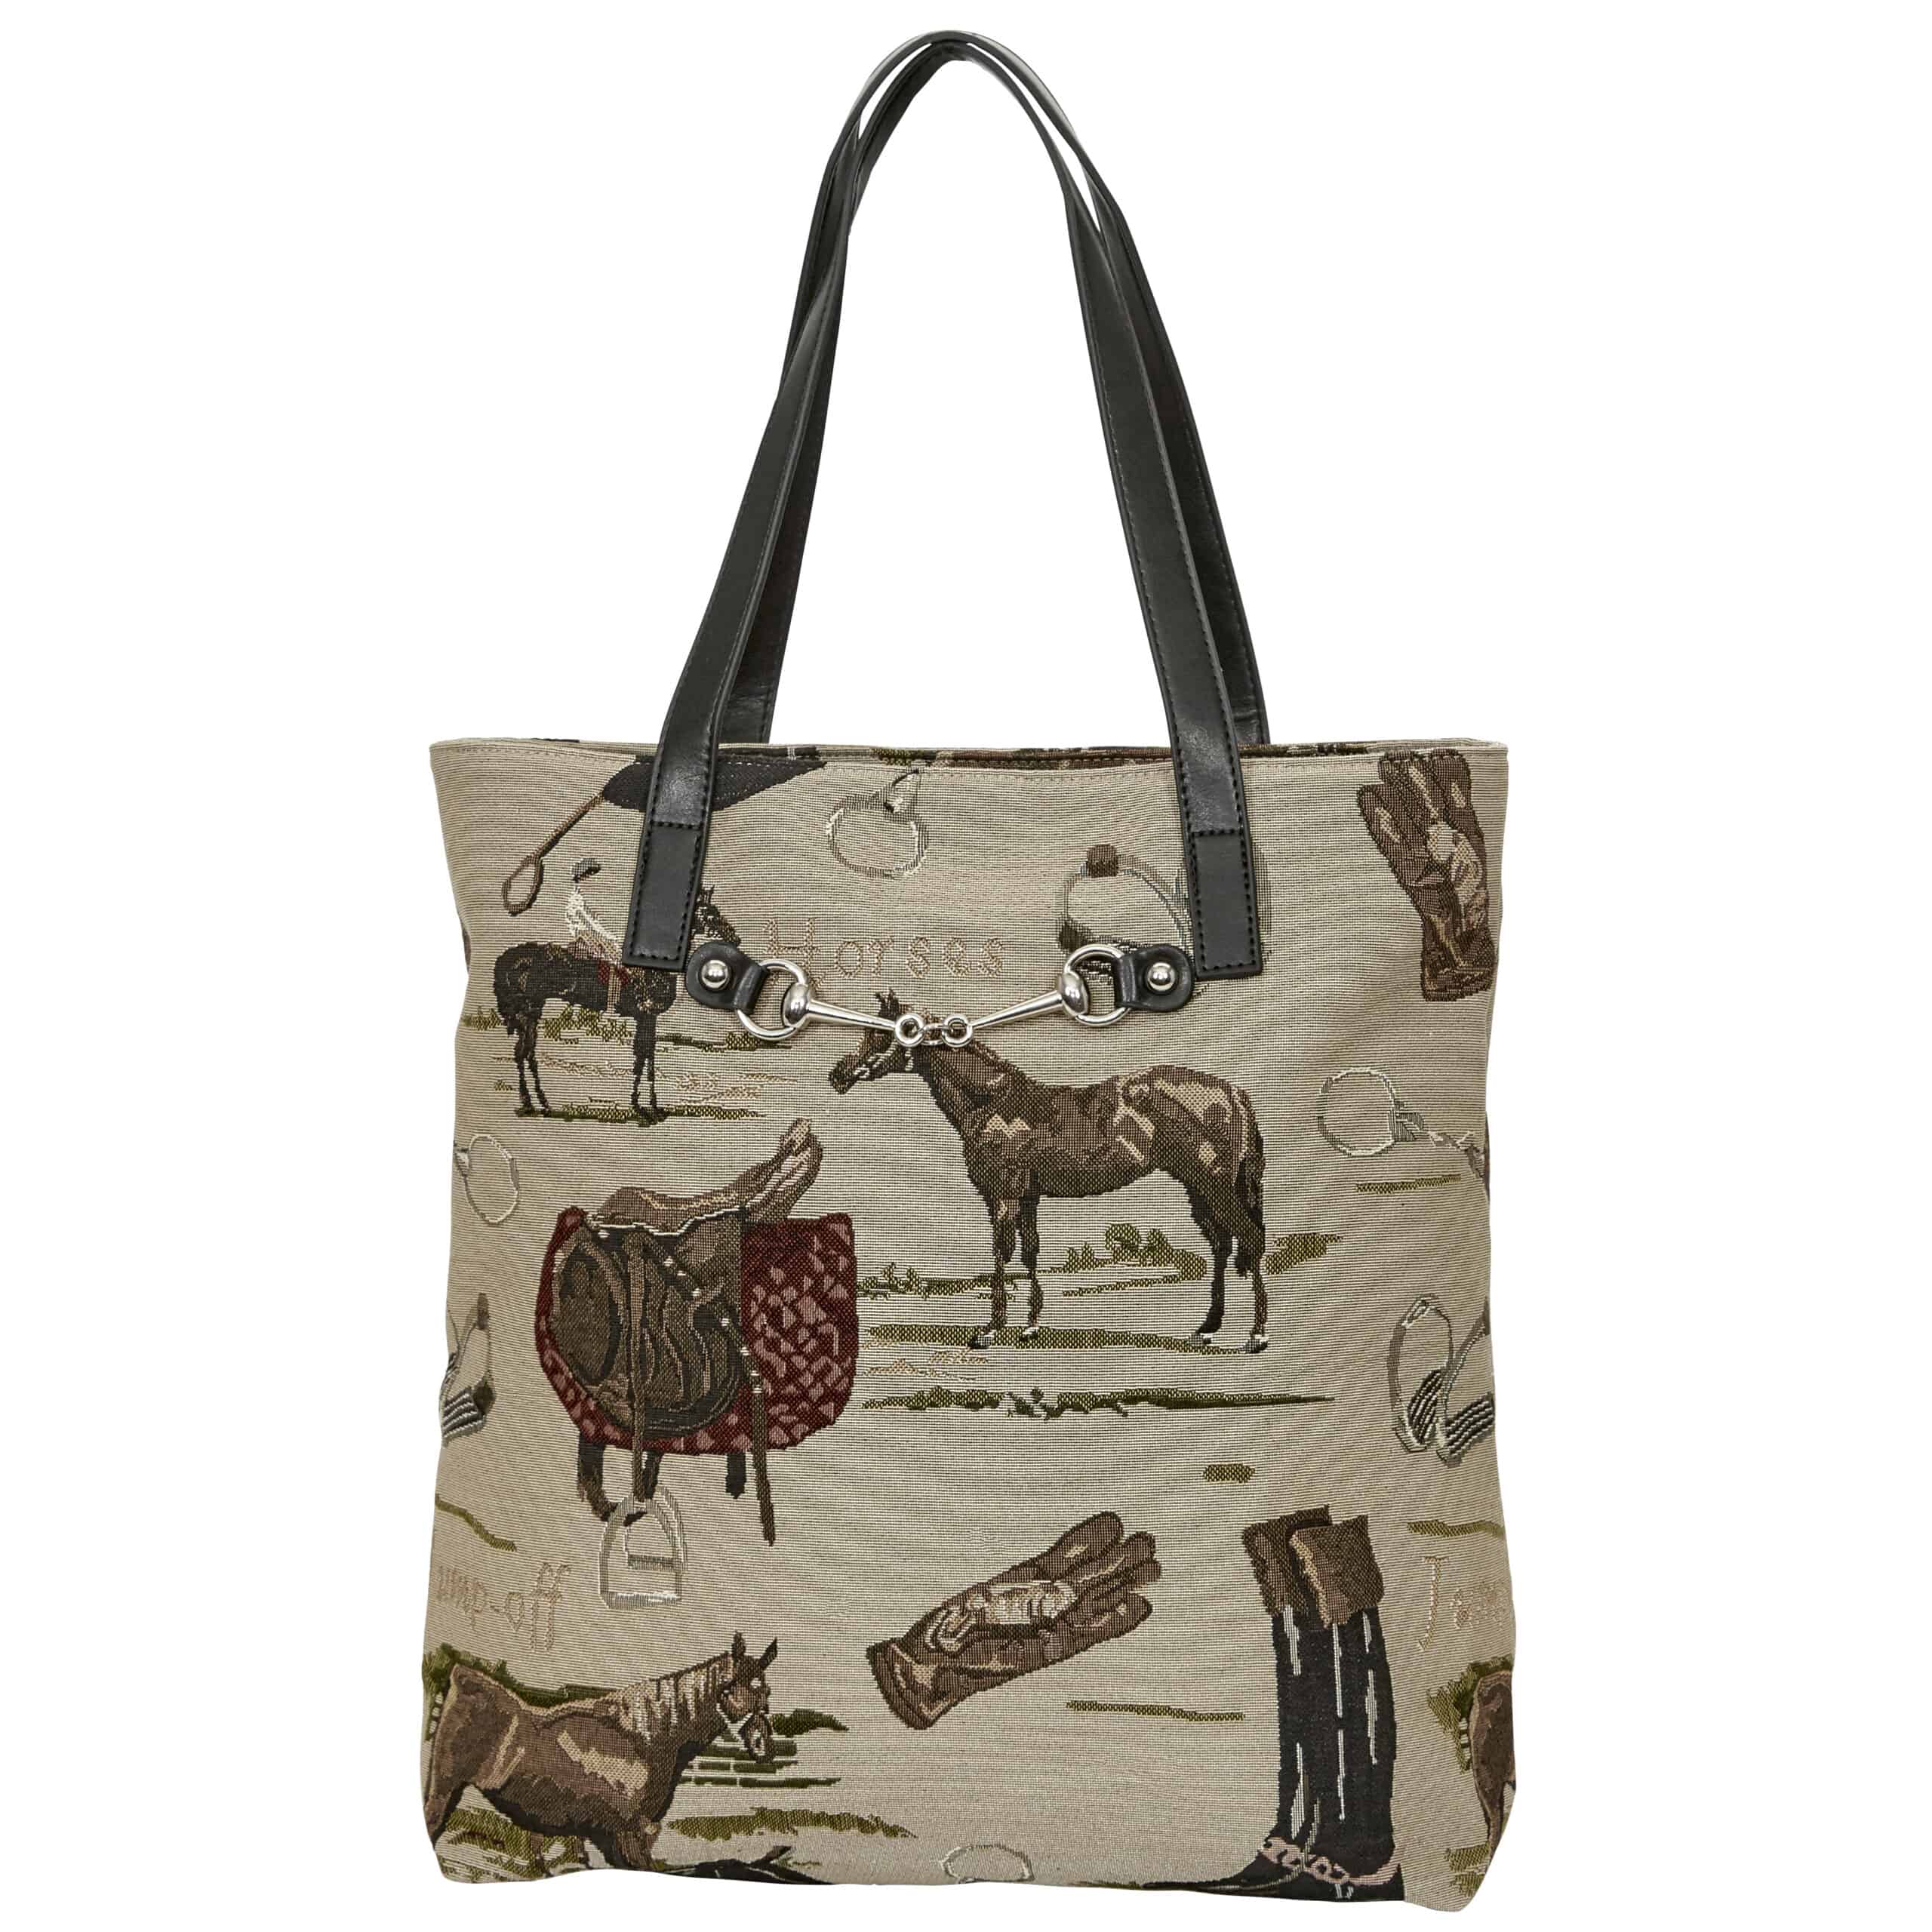 AWST Int’l Equestrian Tapestry Pattern Tote Bag with Snaffle Bit » The ...